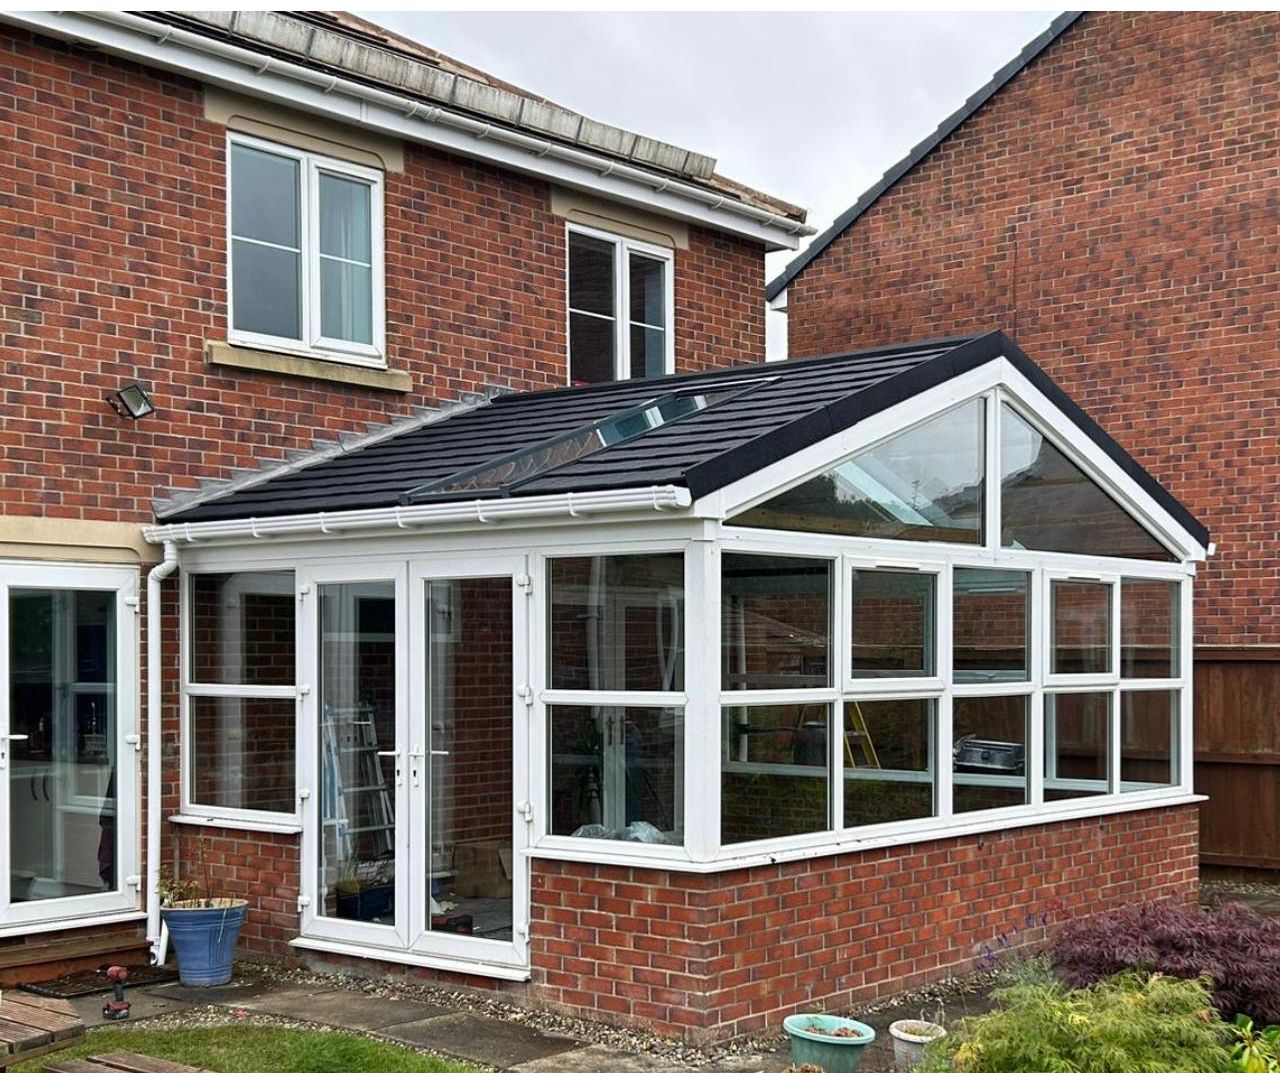 A lean-to conservatory with a gabled front and a black tiled roof, attached to a red brick house. The conservatory has white frames, large windows, and French doors, nestled in a garden with potted plants and a neatly trimmed lawn